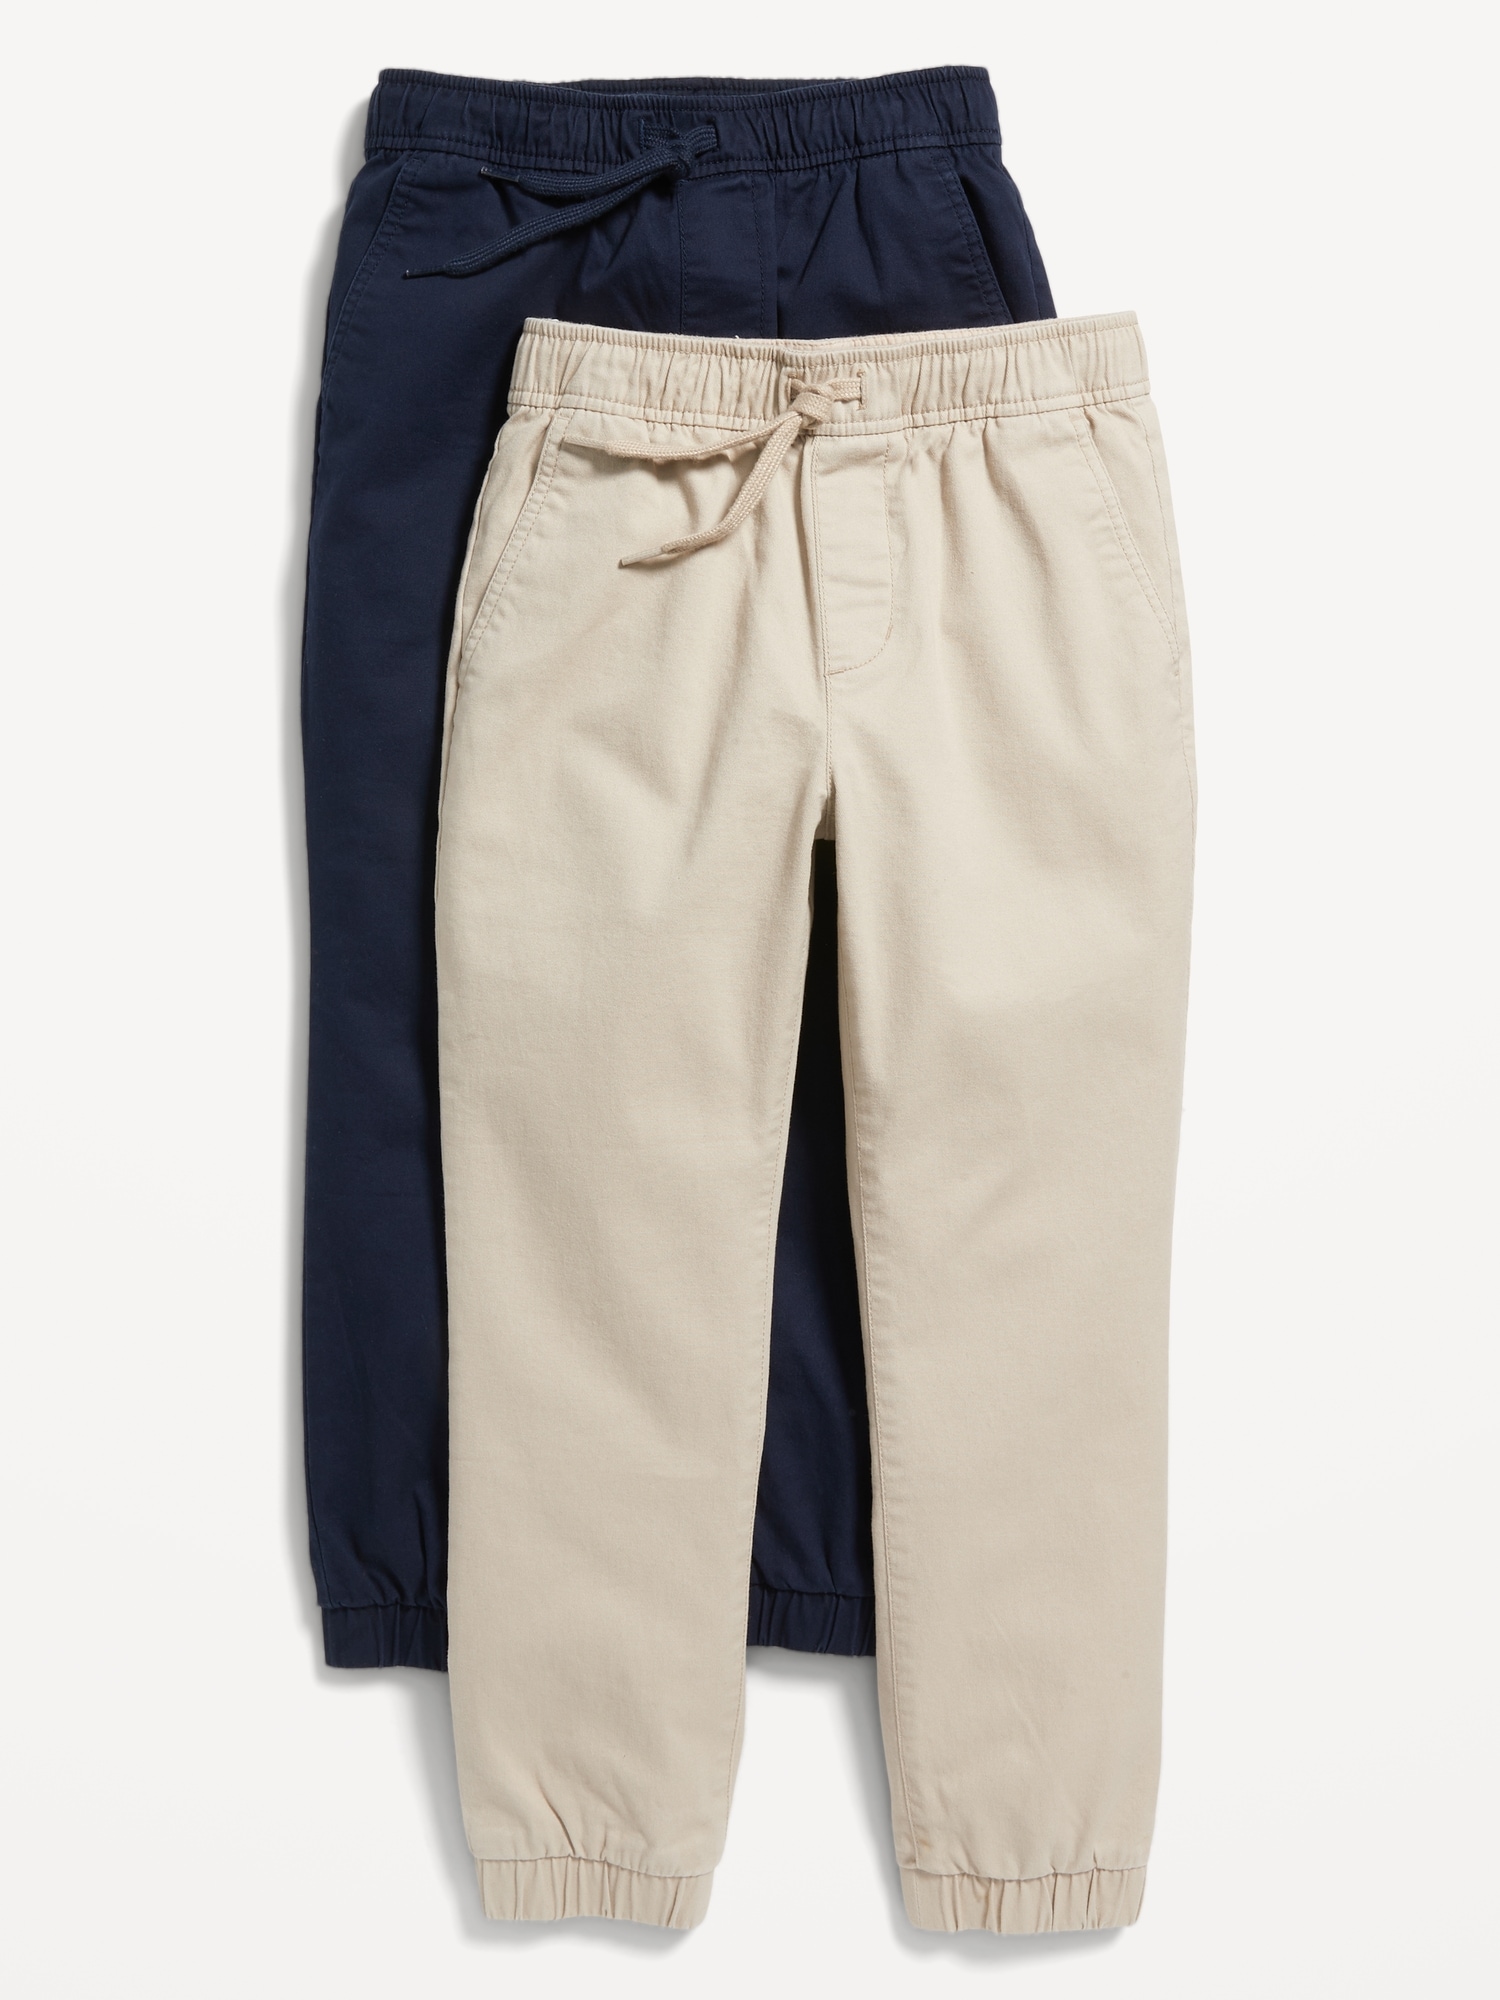 Built-In Flex Twill Joggers for Toddler Boys